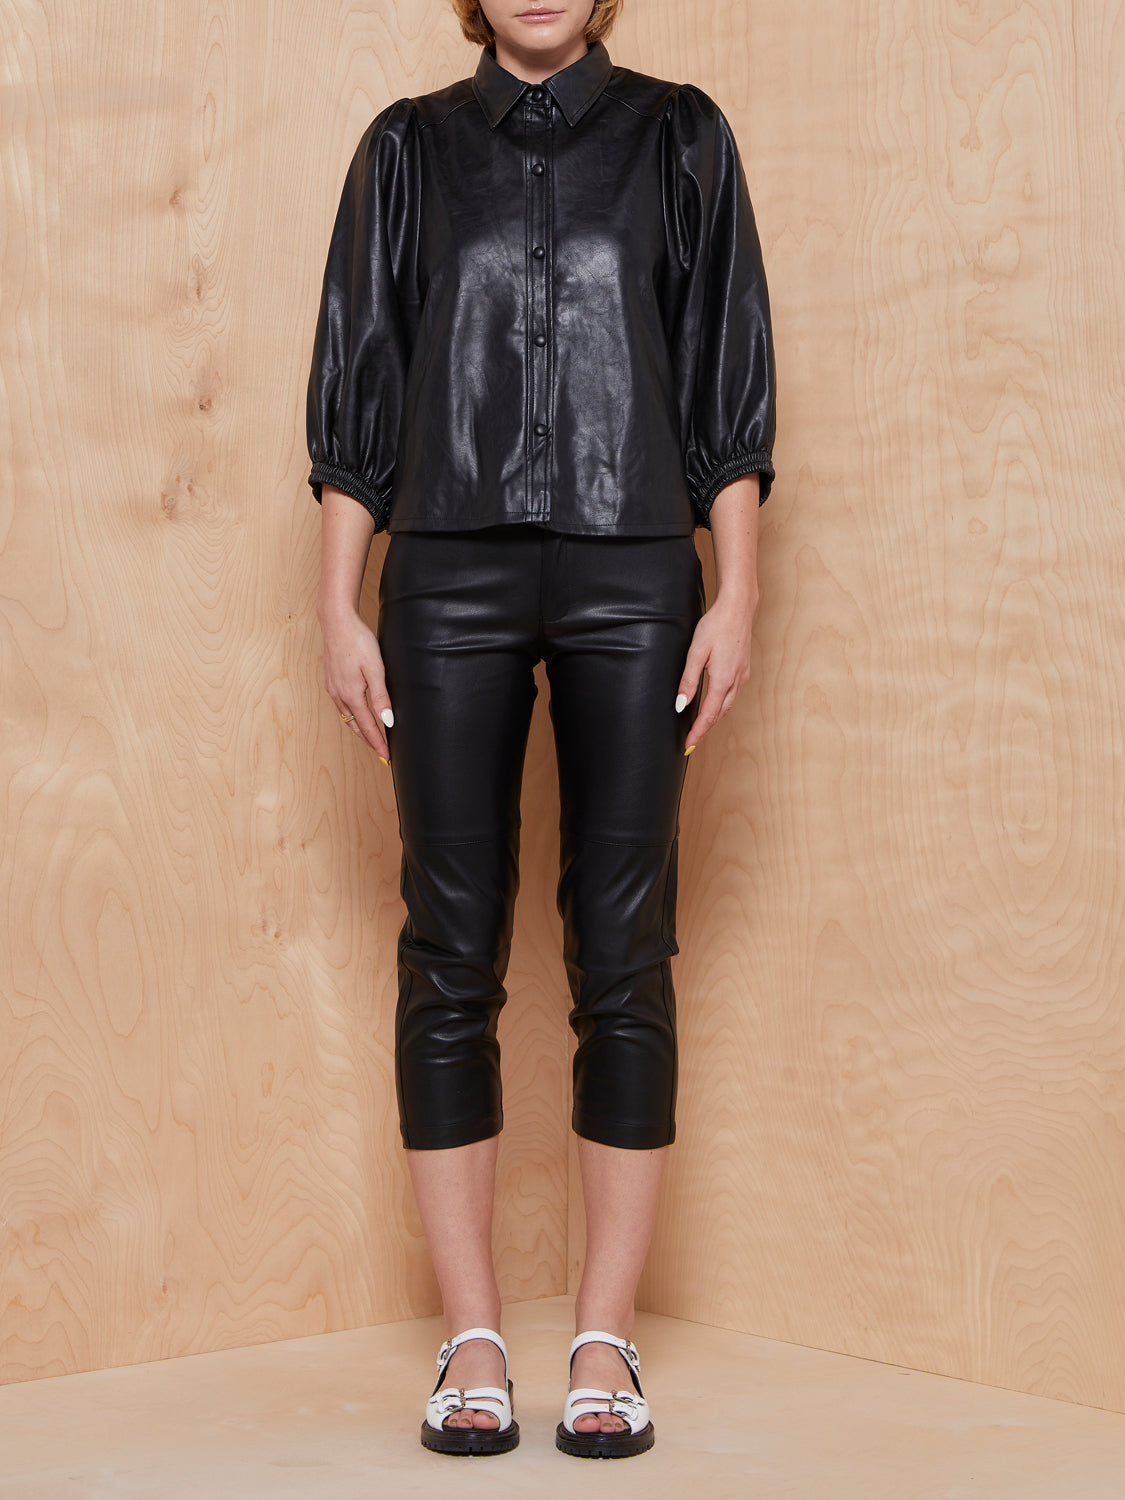 Verified Black Vegan Leather Top with Puff Sleeves